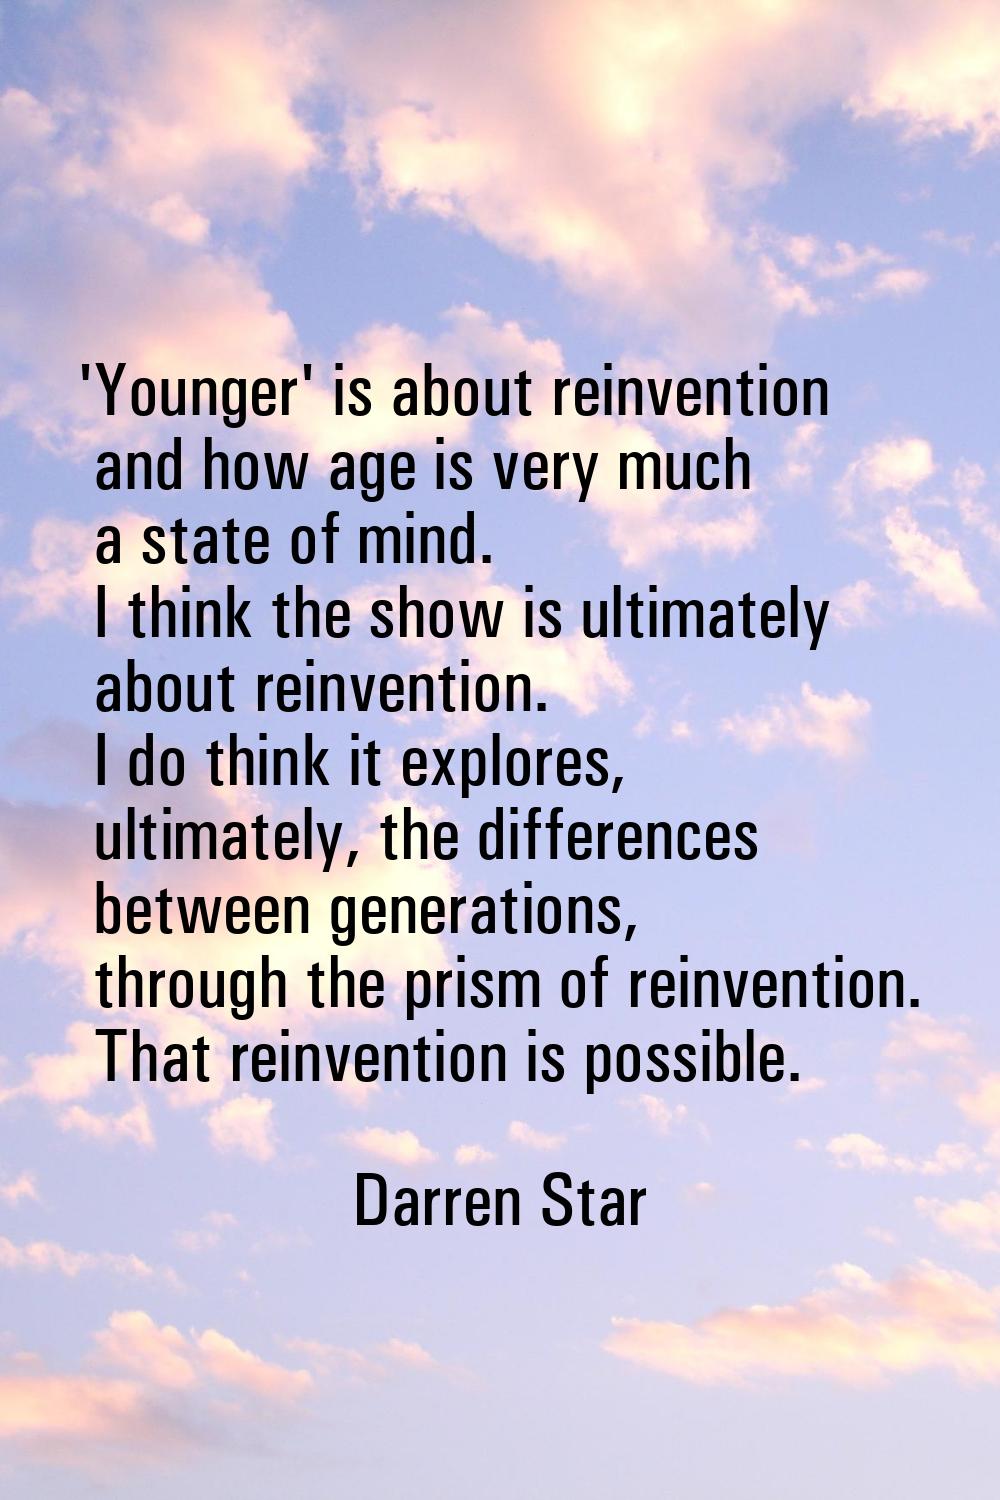 'Younger' is about reinvention and how age is very much a state of mind. I think the show is ultima